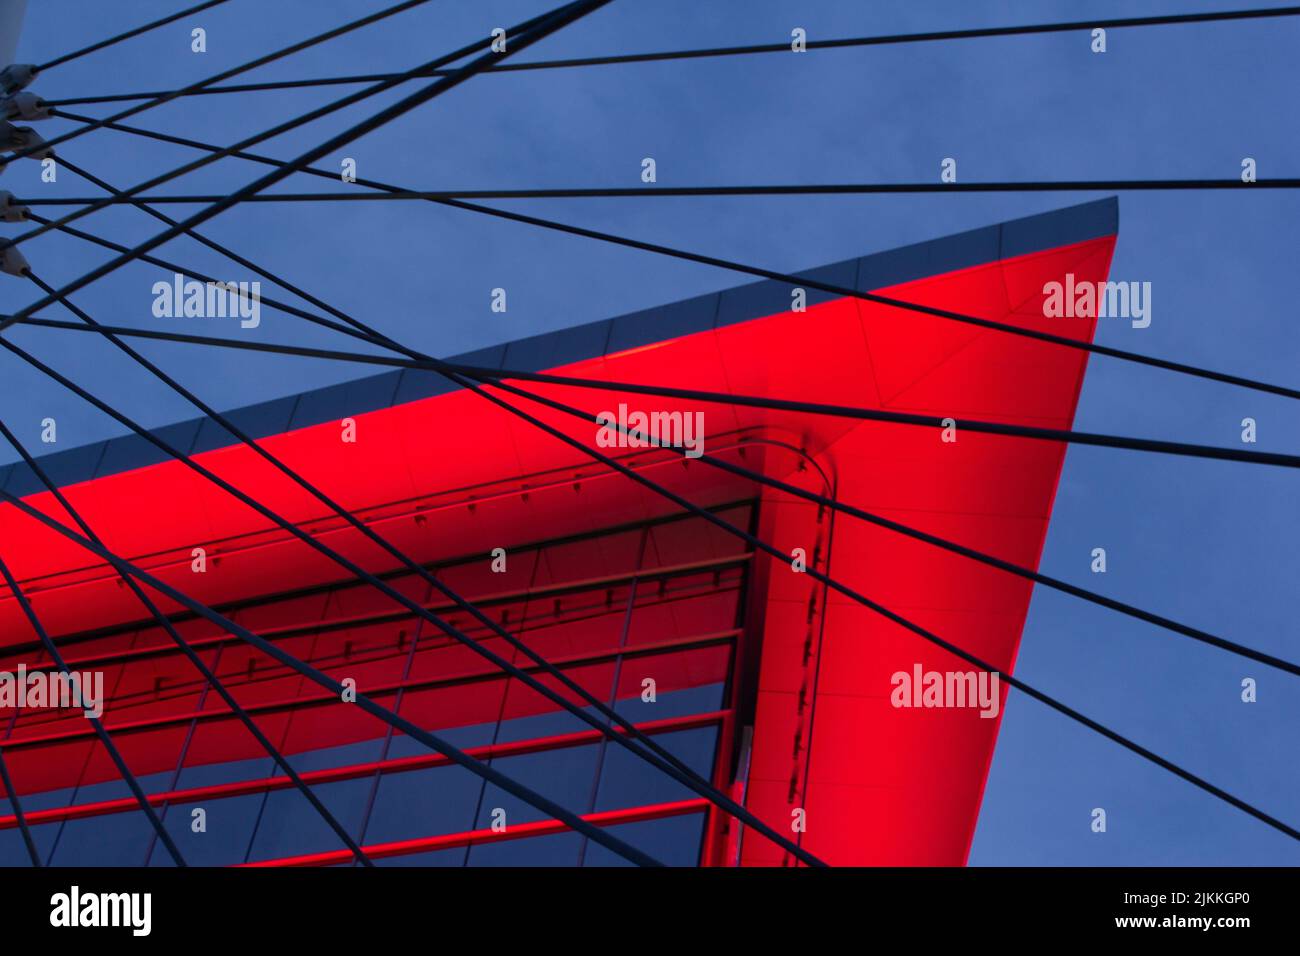 The red roof behind the aluminum panels Stock Photo